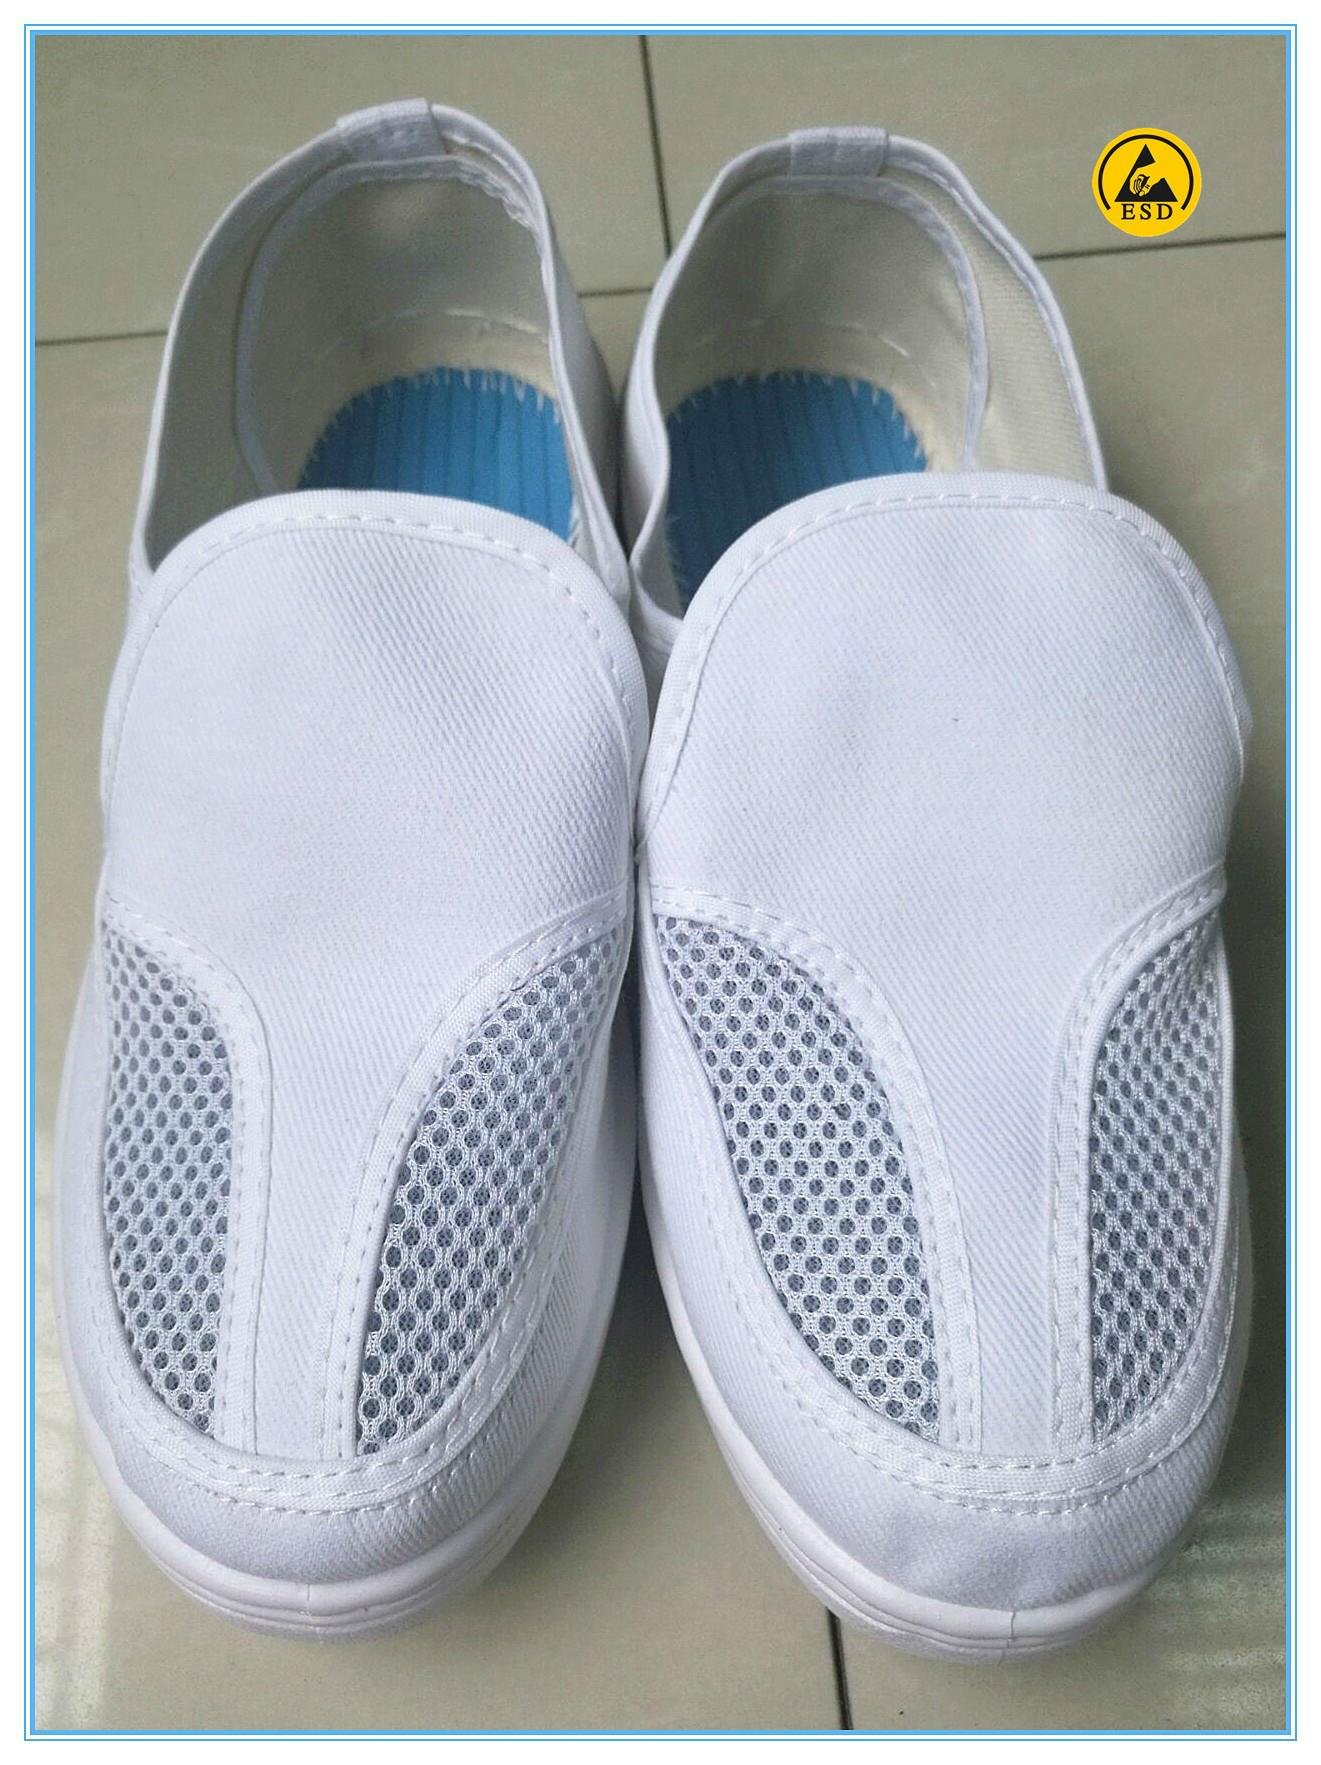 white canvas upper pvc outsole anti static shoes 